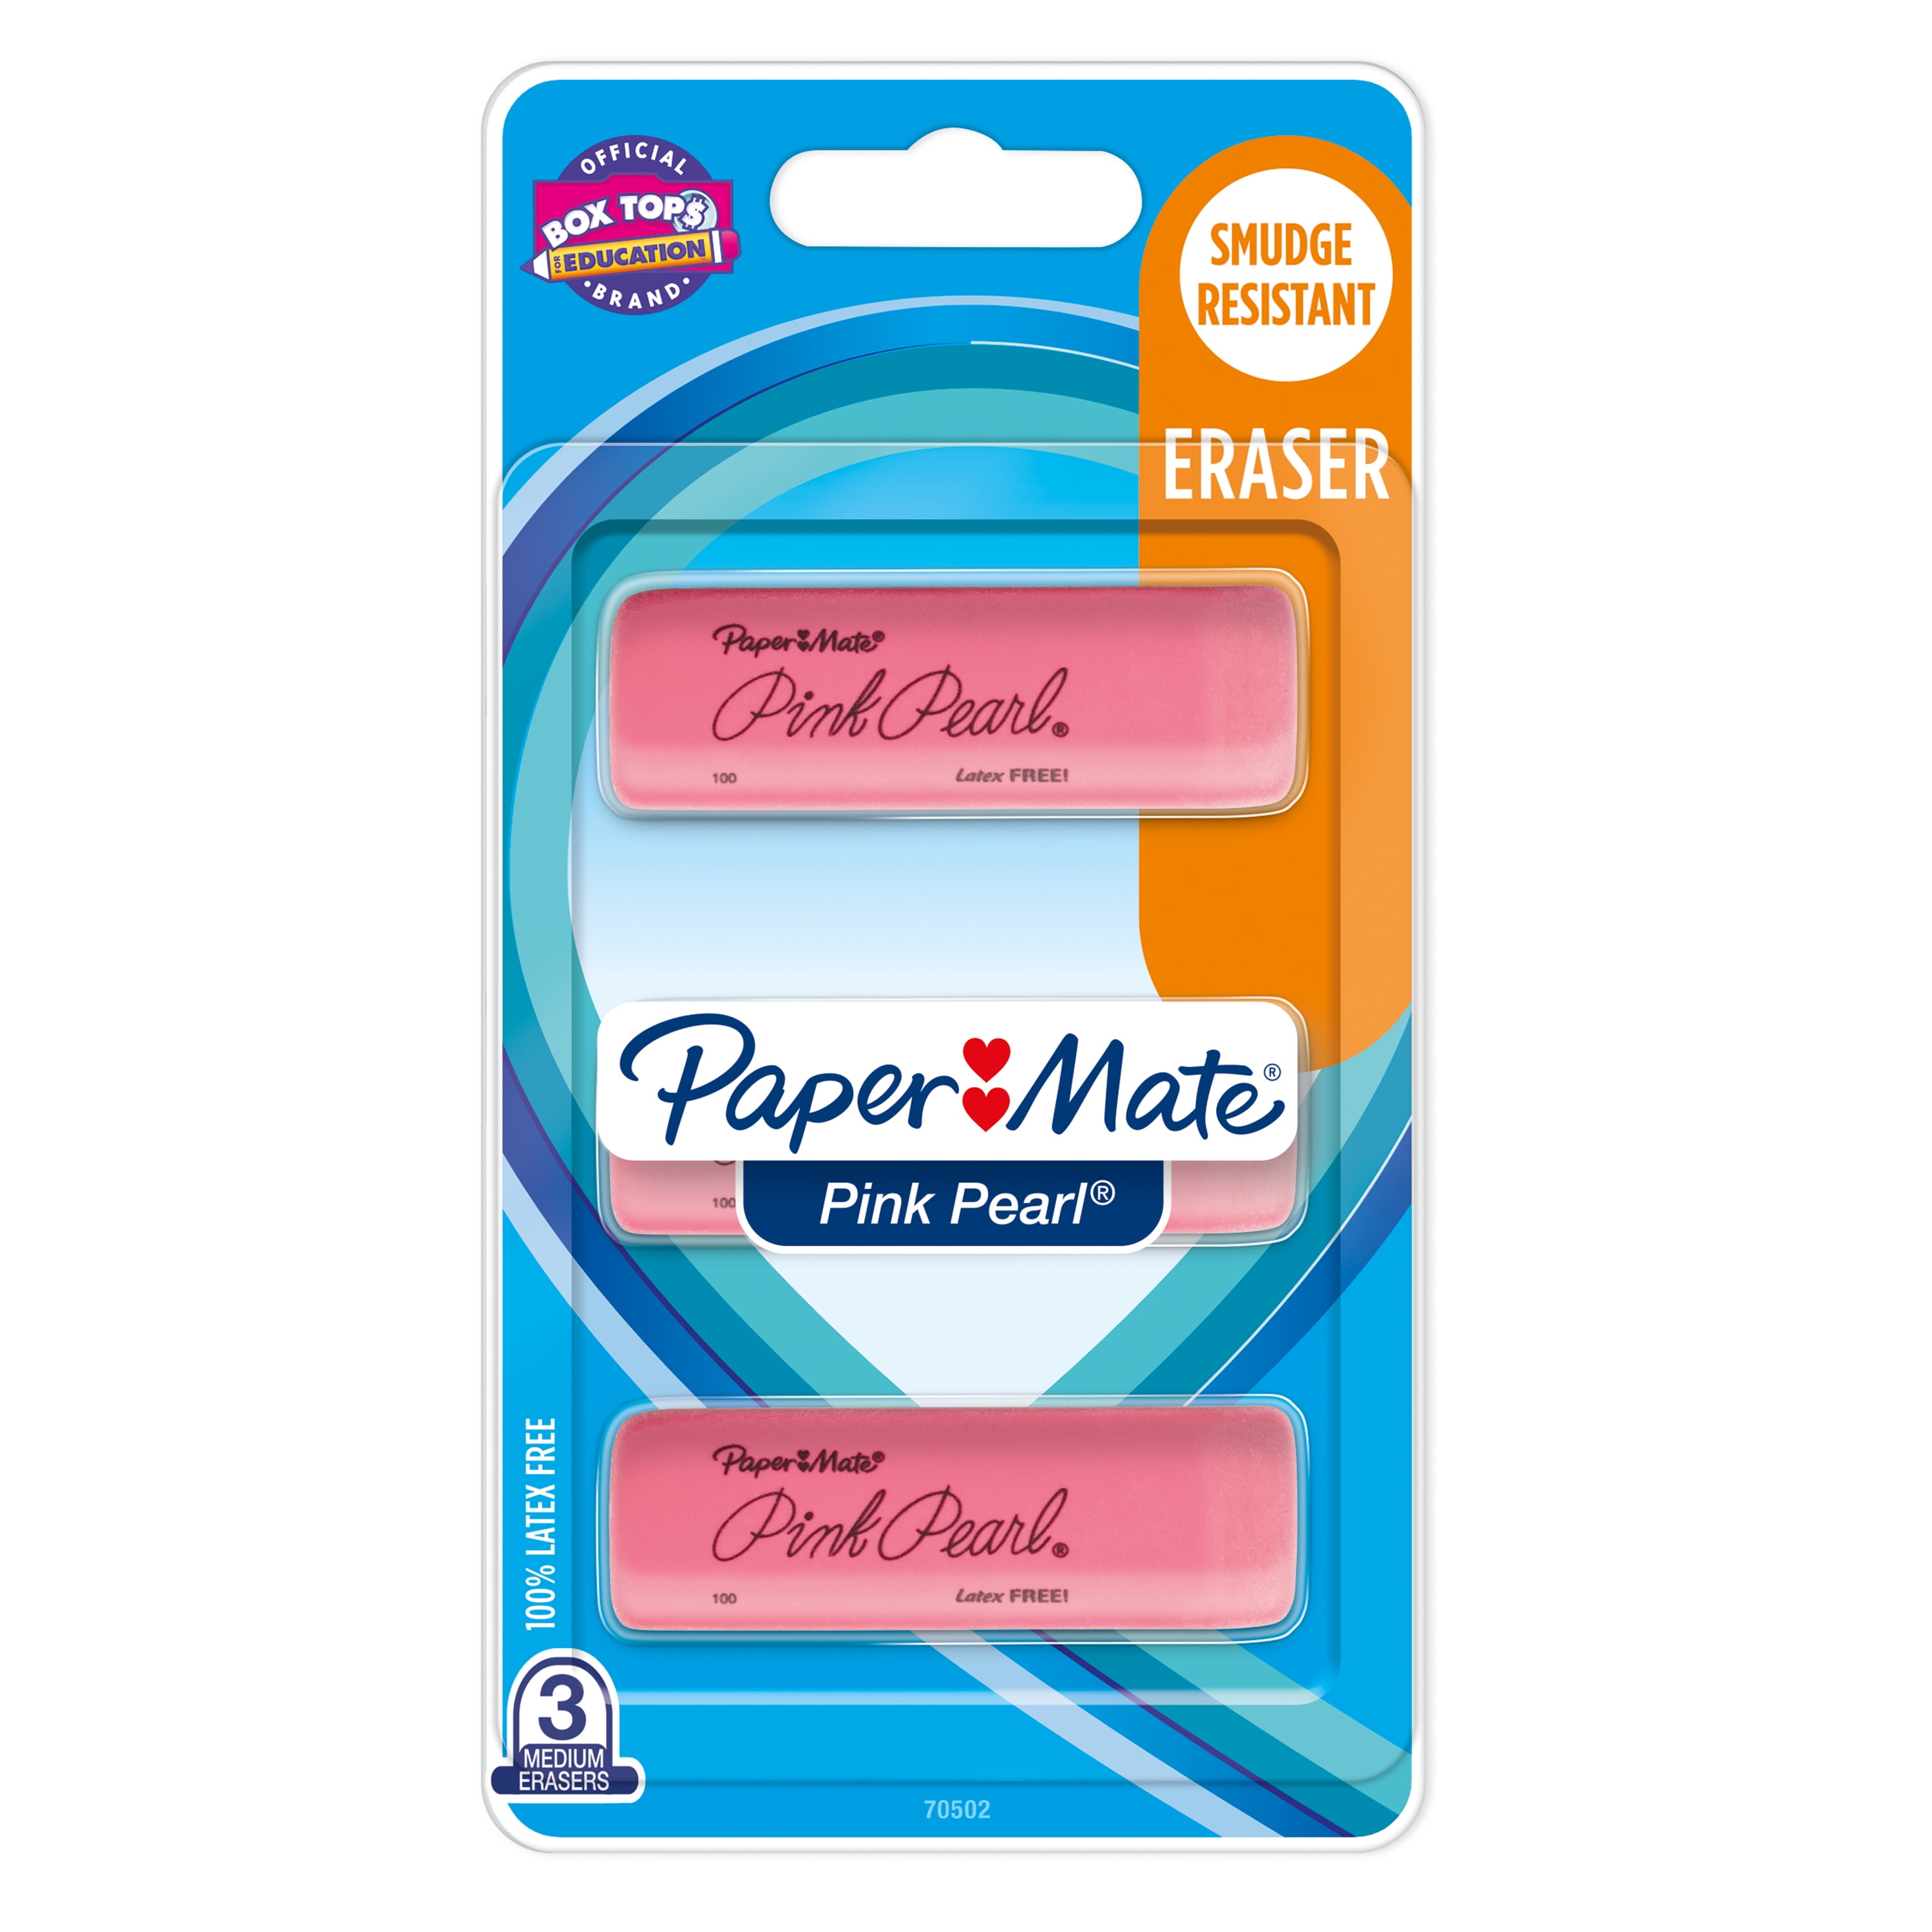 Paper Mate White Pearl Eraser 12 pack Large Erasers 